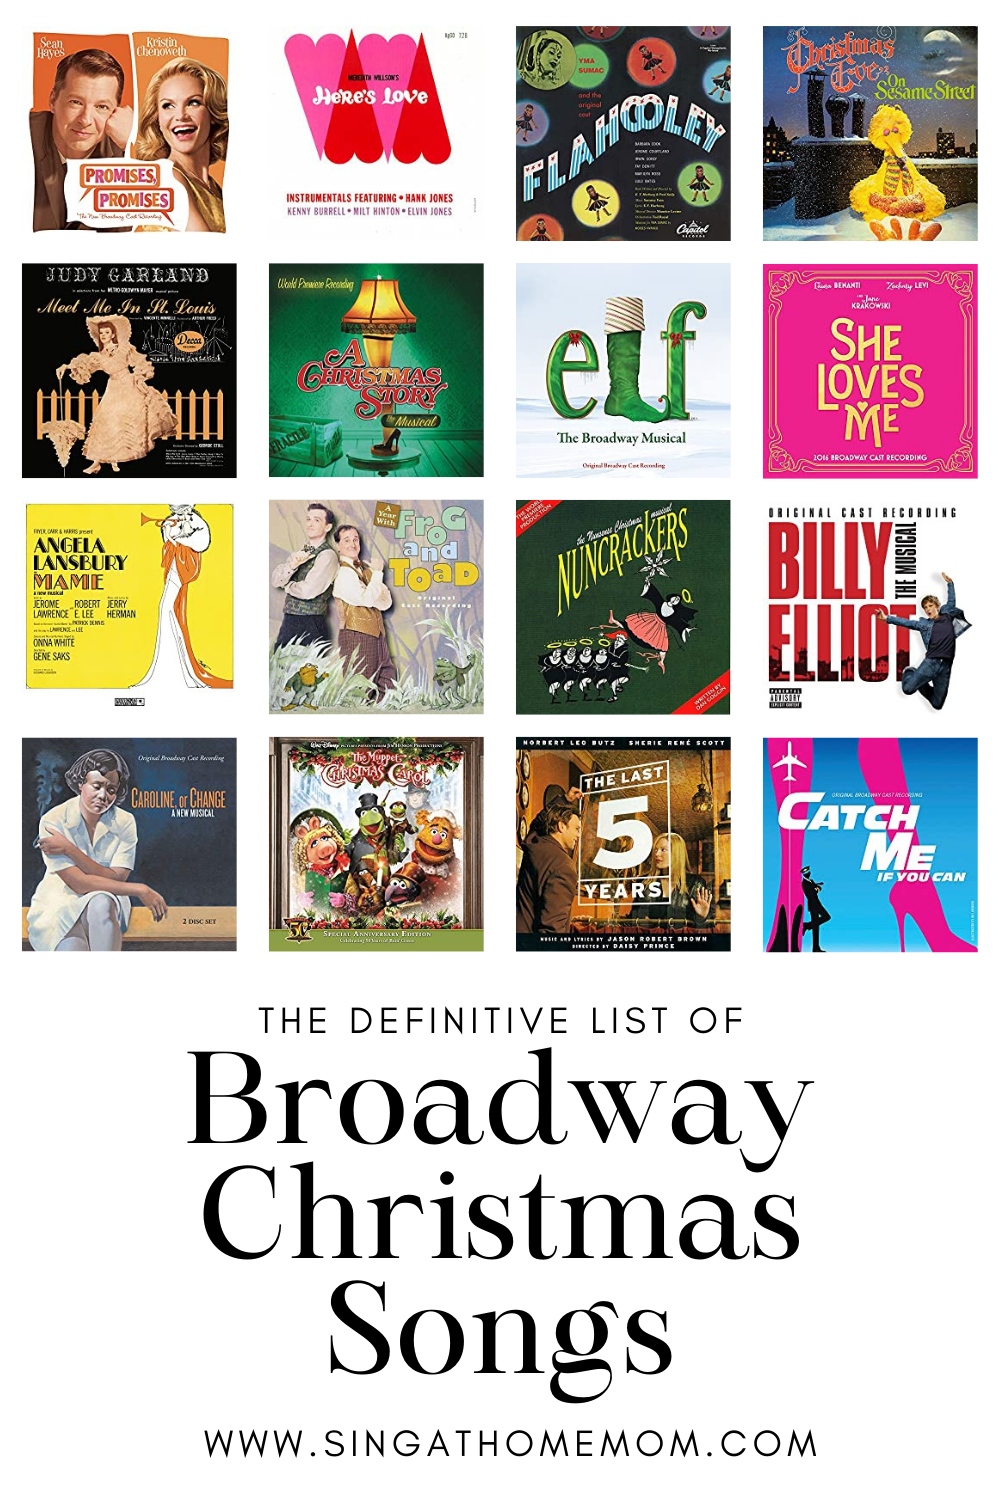 broadway and musical theater shows with christmas songs